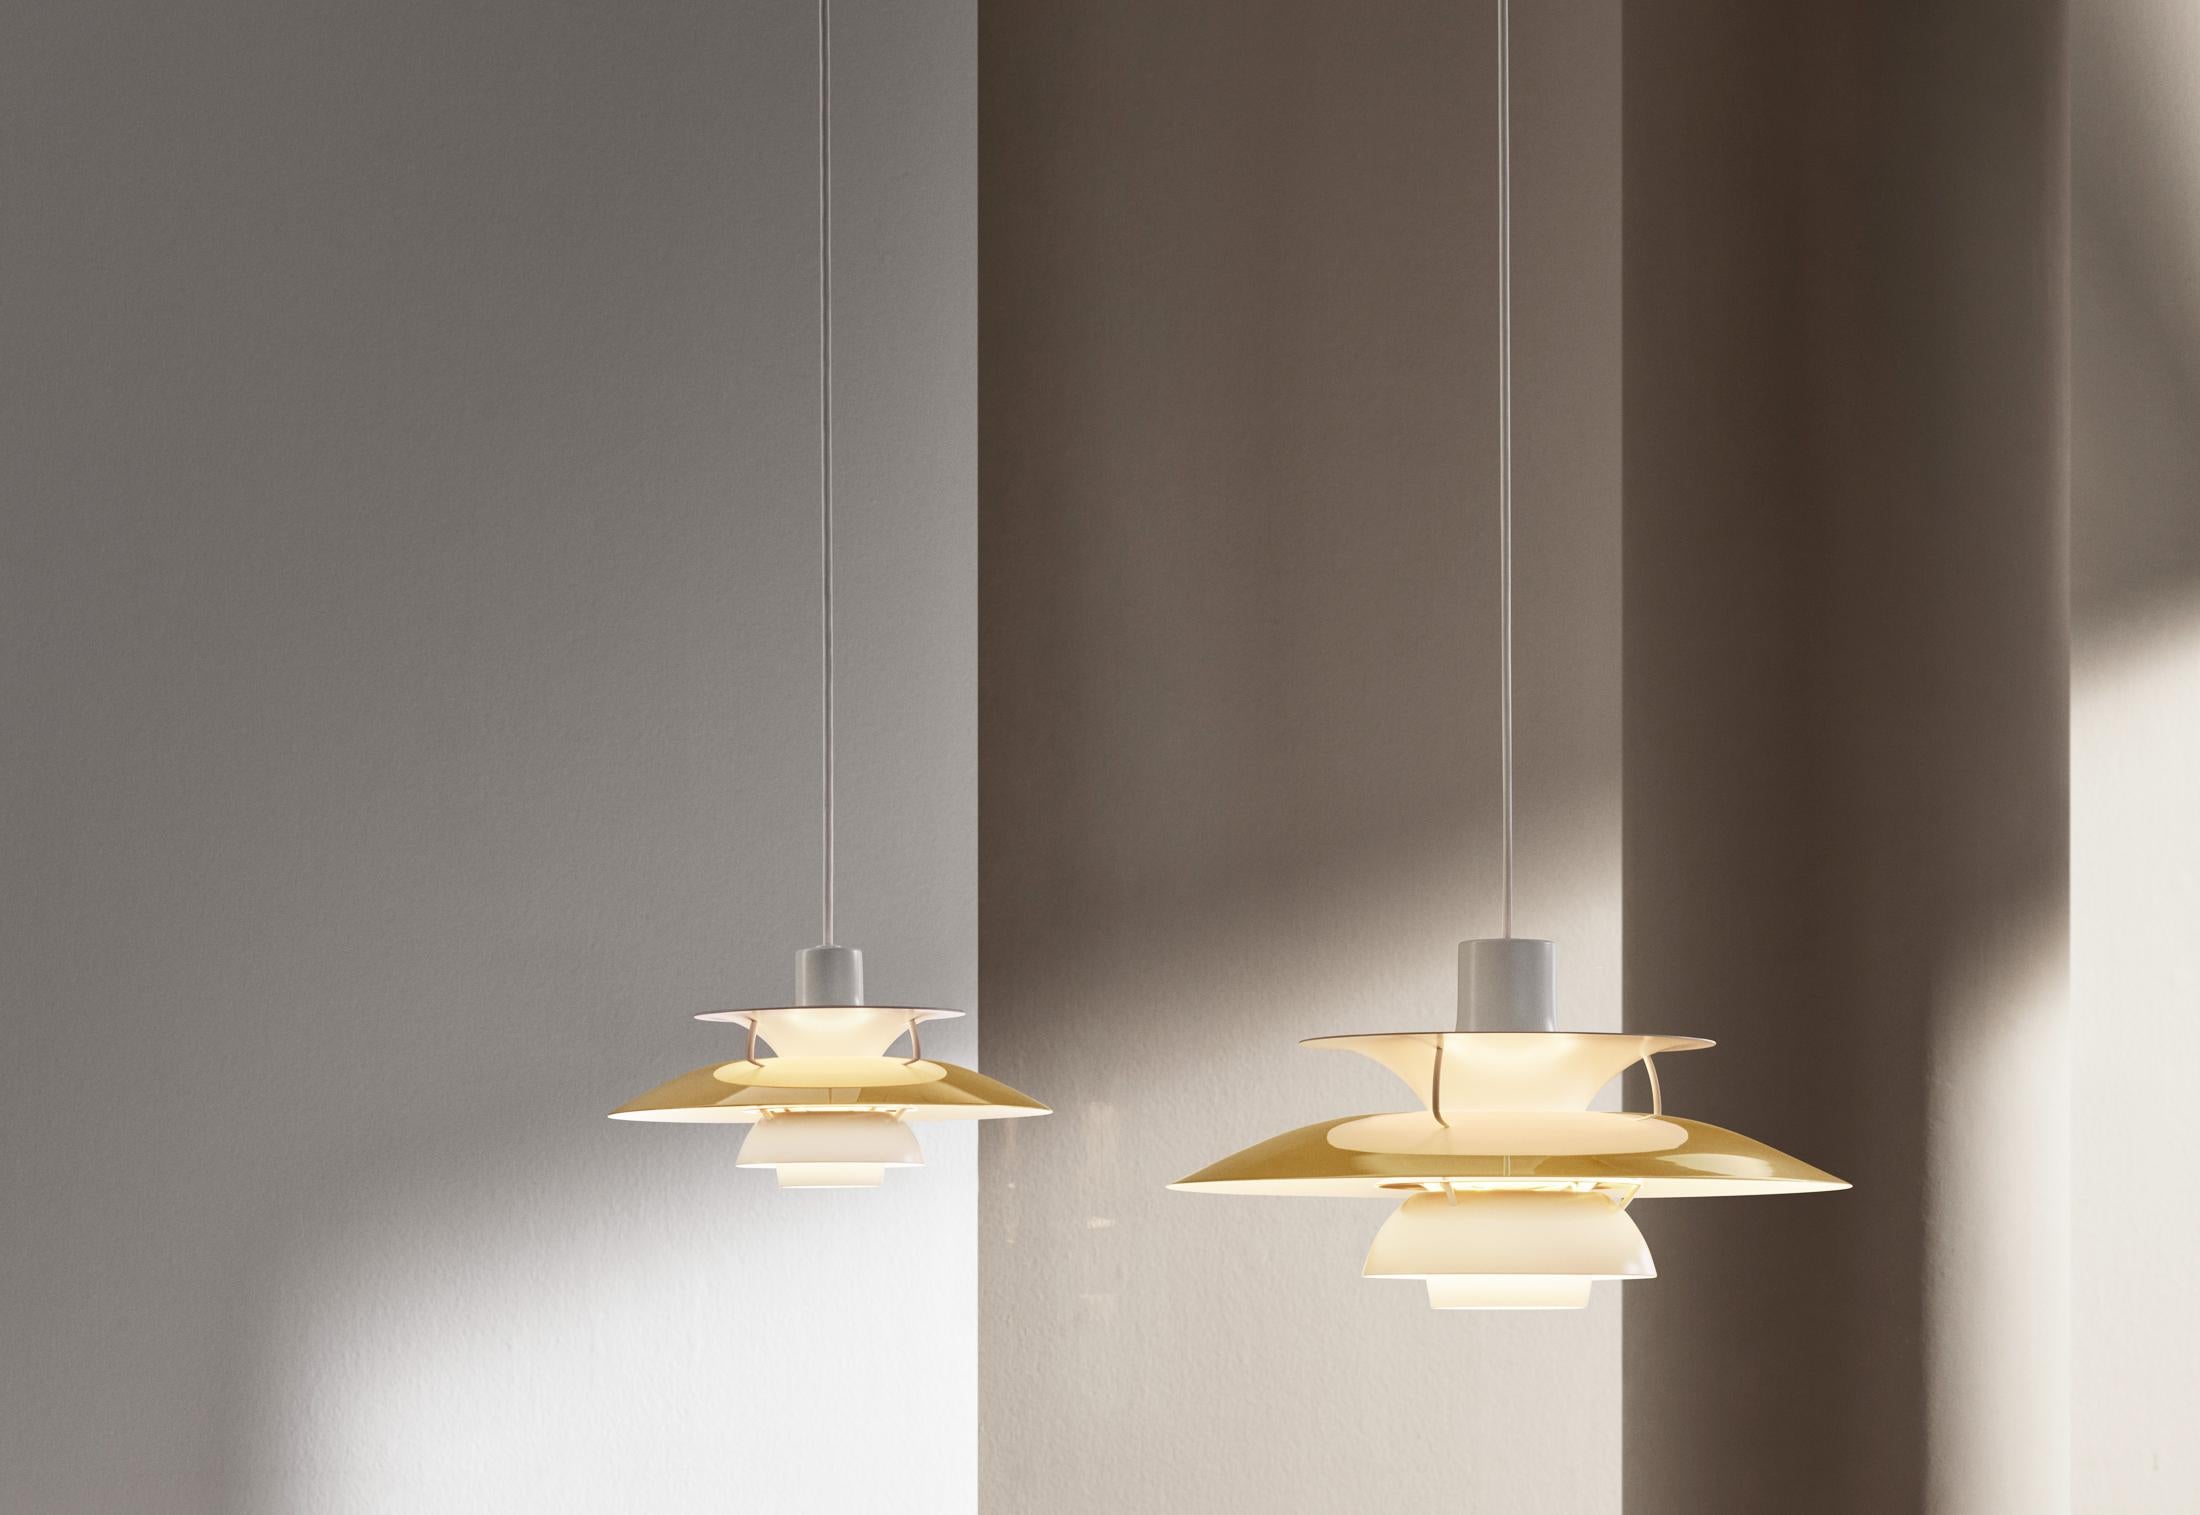 Poul Henningsen PH 5 brass pendant for Louis Poulsen. Poul Henningsen introduced his iconic PH 5 pendant light in 1958. To celebrate, Louis Poulsen is putting out this special 60th Anniversary edition in brass. Six decades later, the PH 5 remains